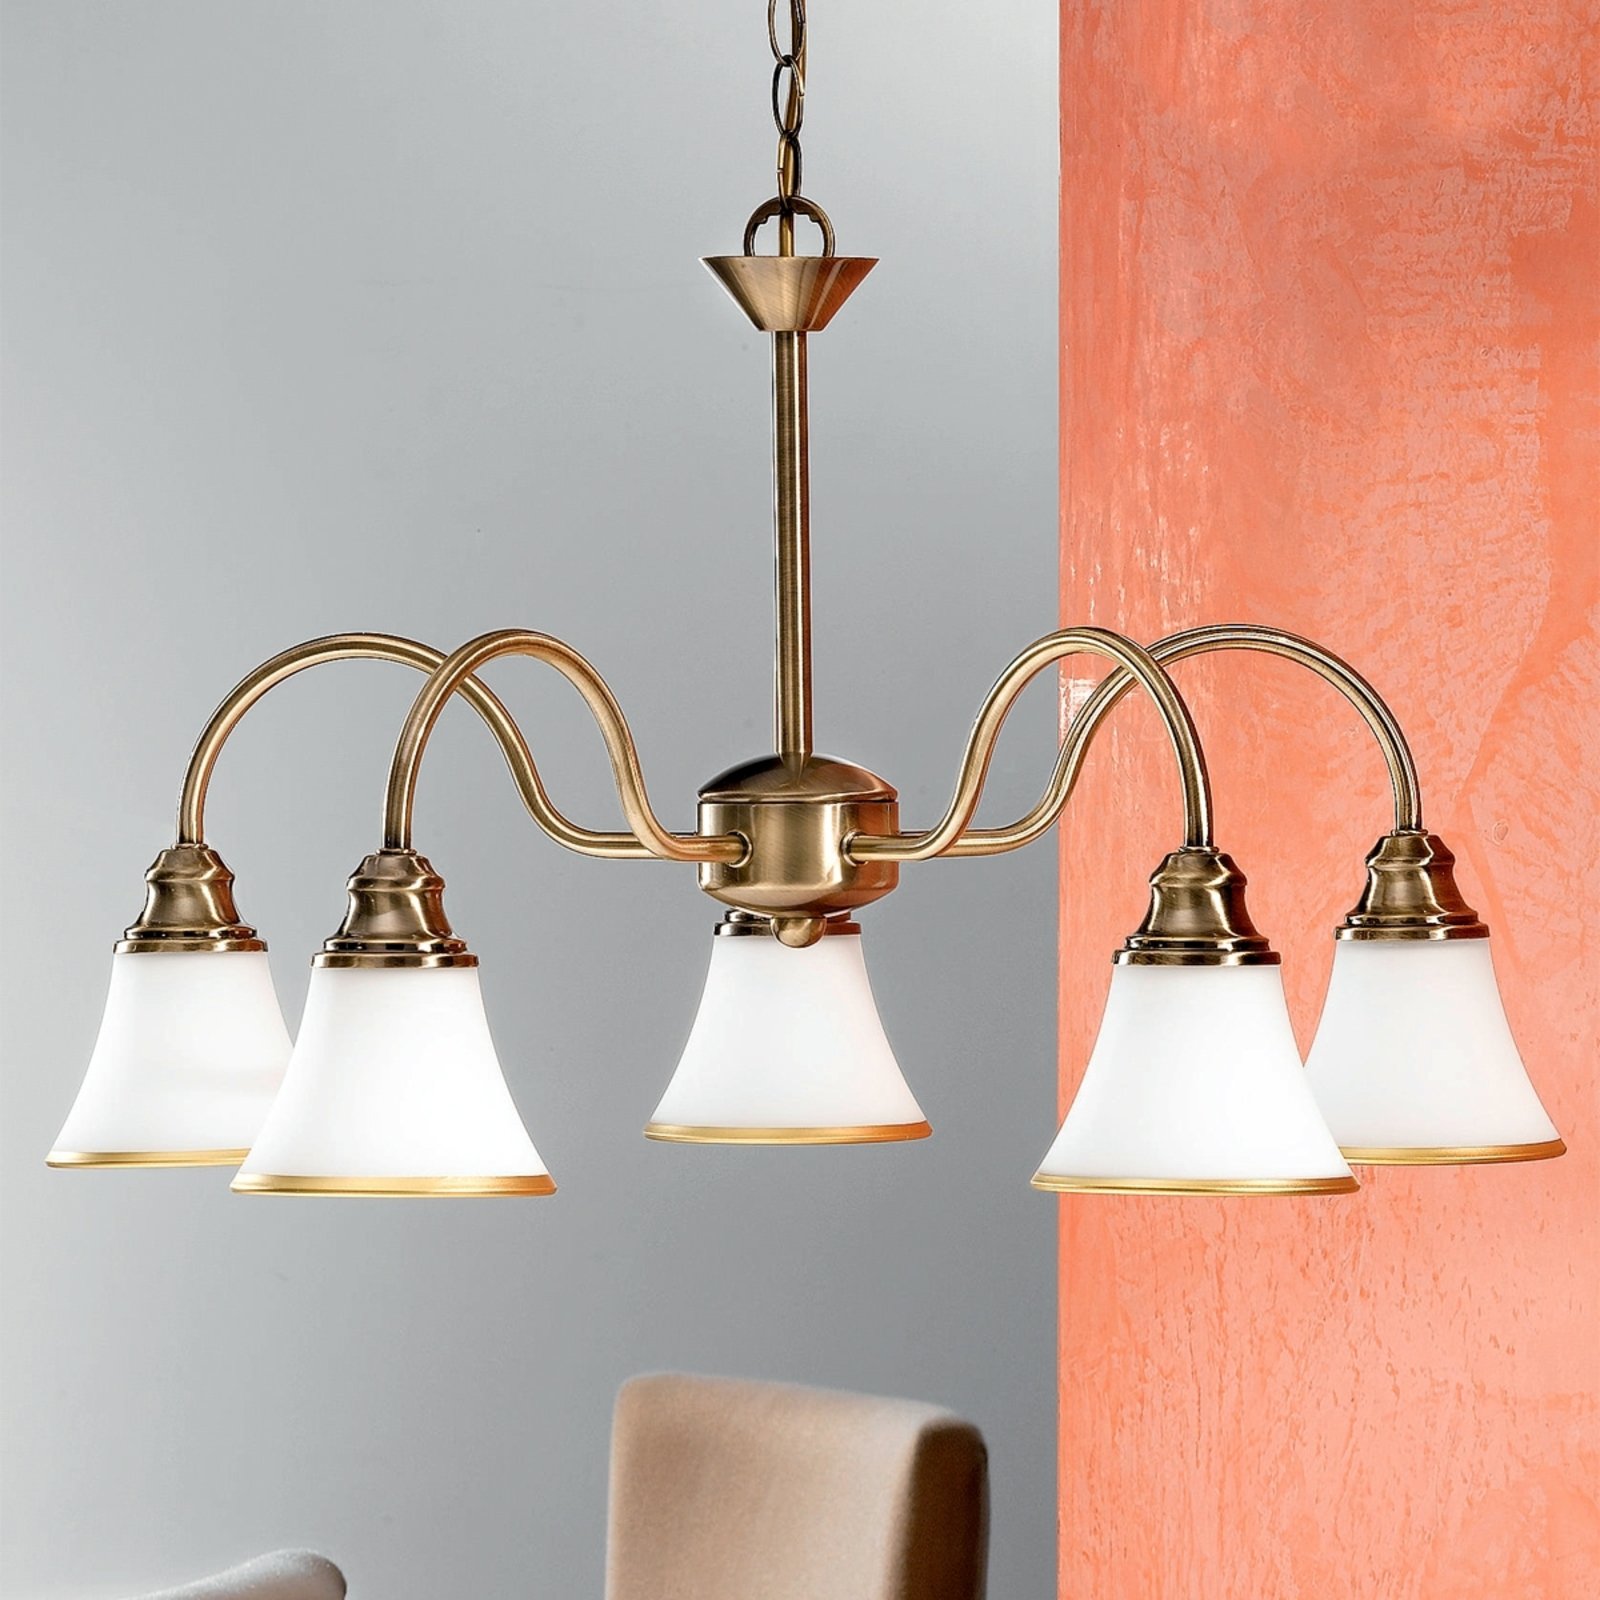 TILDA - 5-lichts hanglamp, oudmessing-look